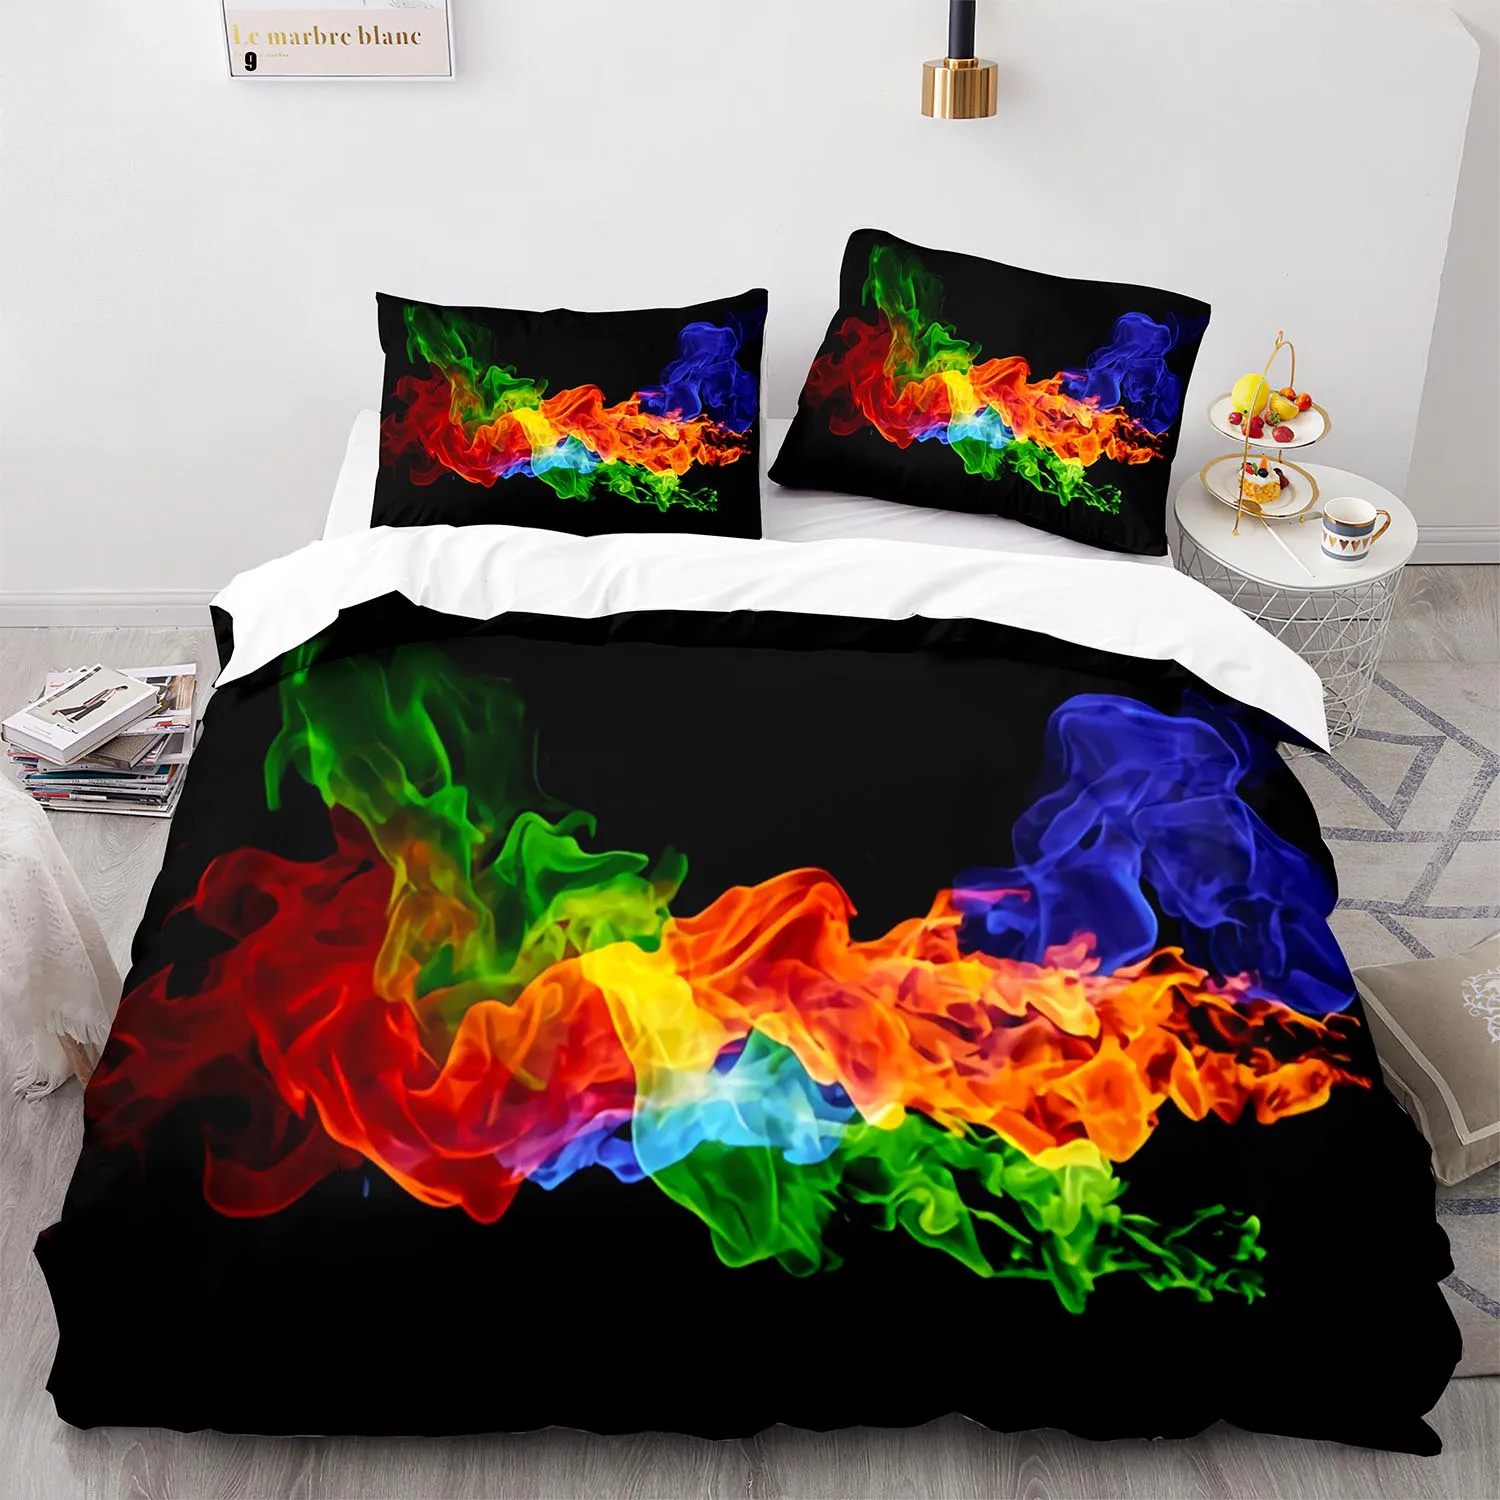 

Colorful Flame Bedding Set Single Twin Full Queen King Size Ice And Fire Blaze Bed Set Children Kid Bedroom Duvetcover Sets 008